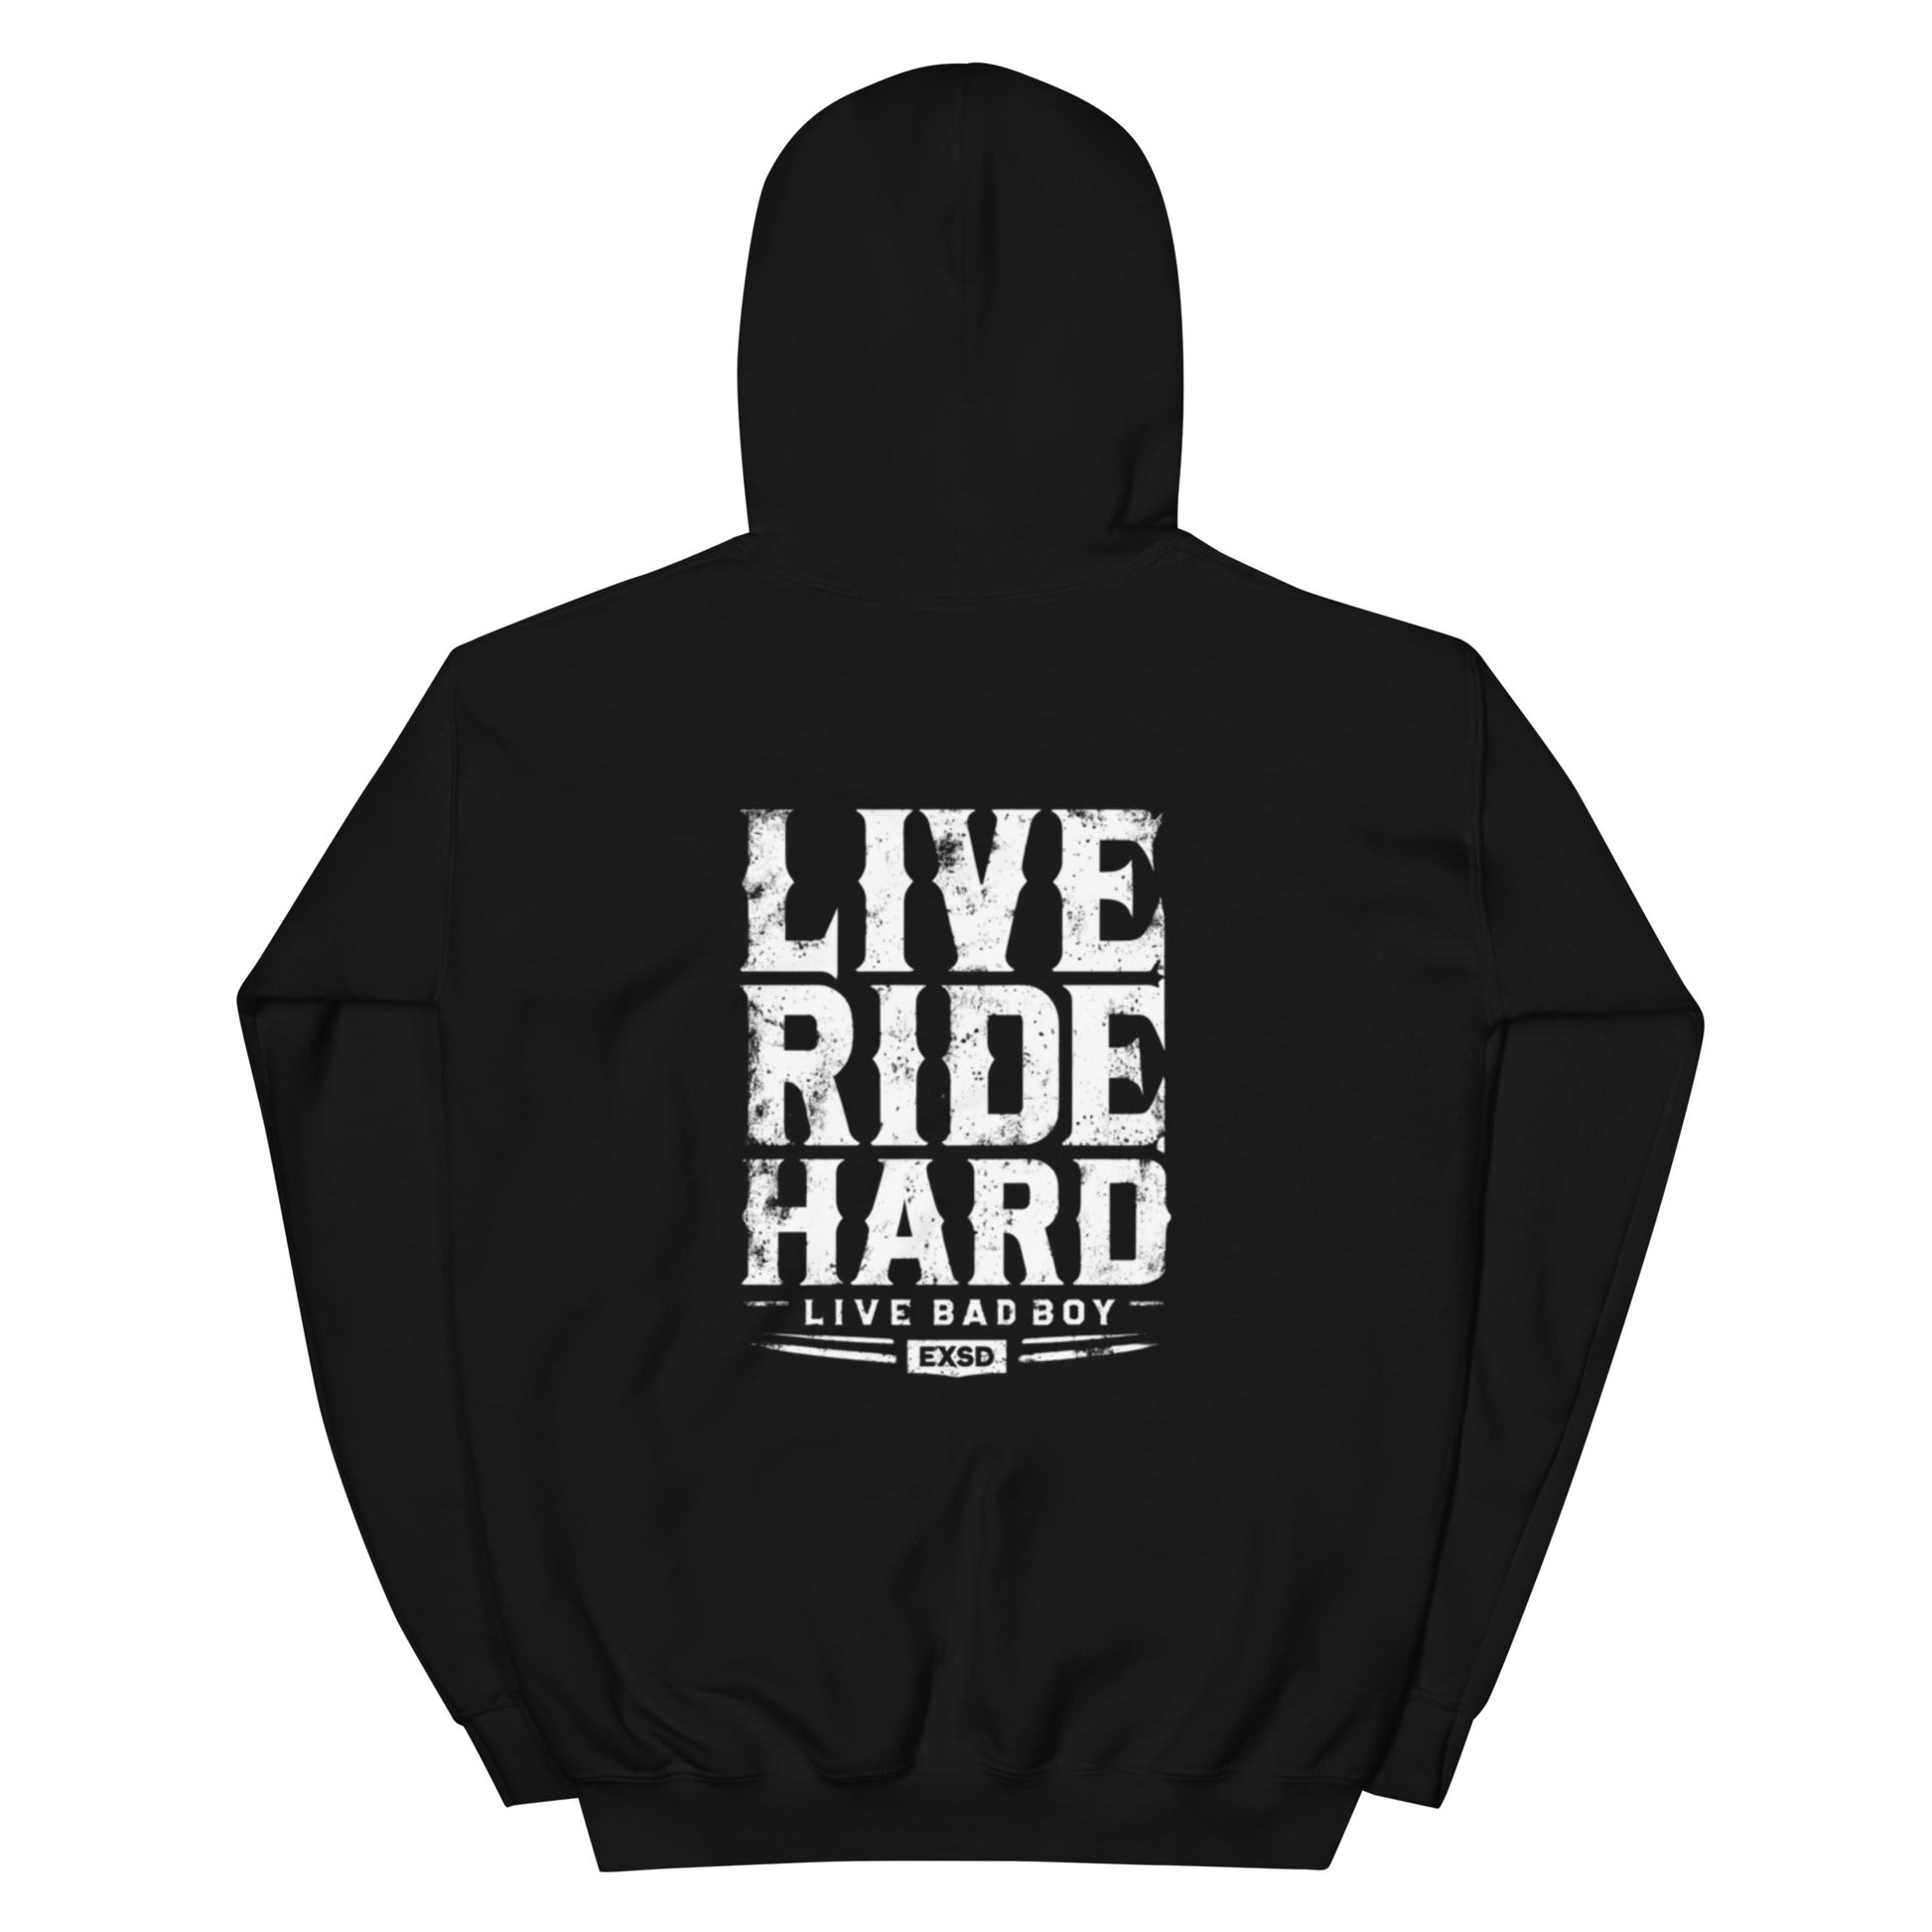 Edgy 'Bad Boy' motorcycle and skull graphic on a black hoodie, ideal for urban streetwear.